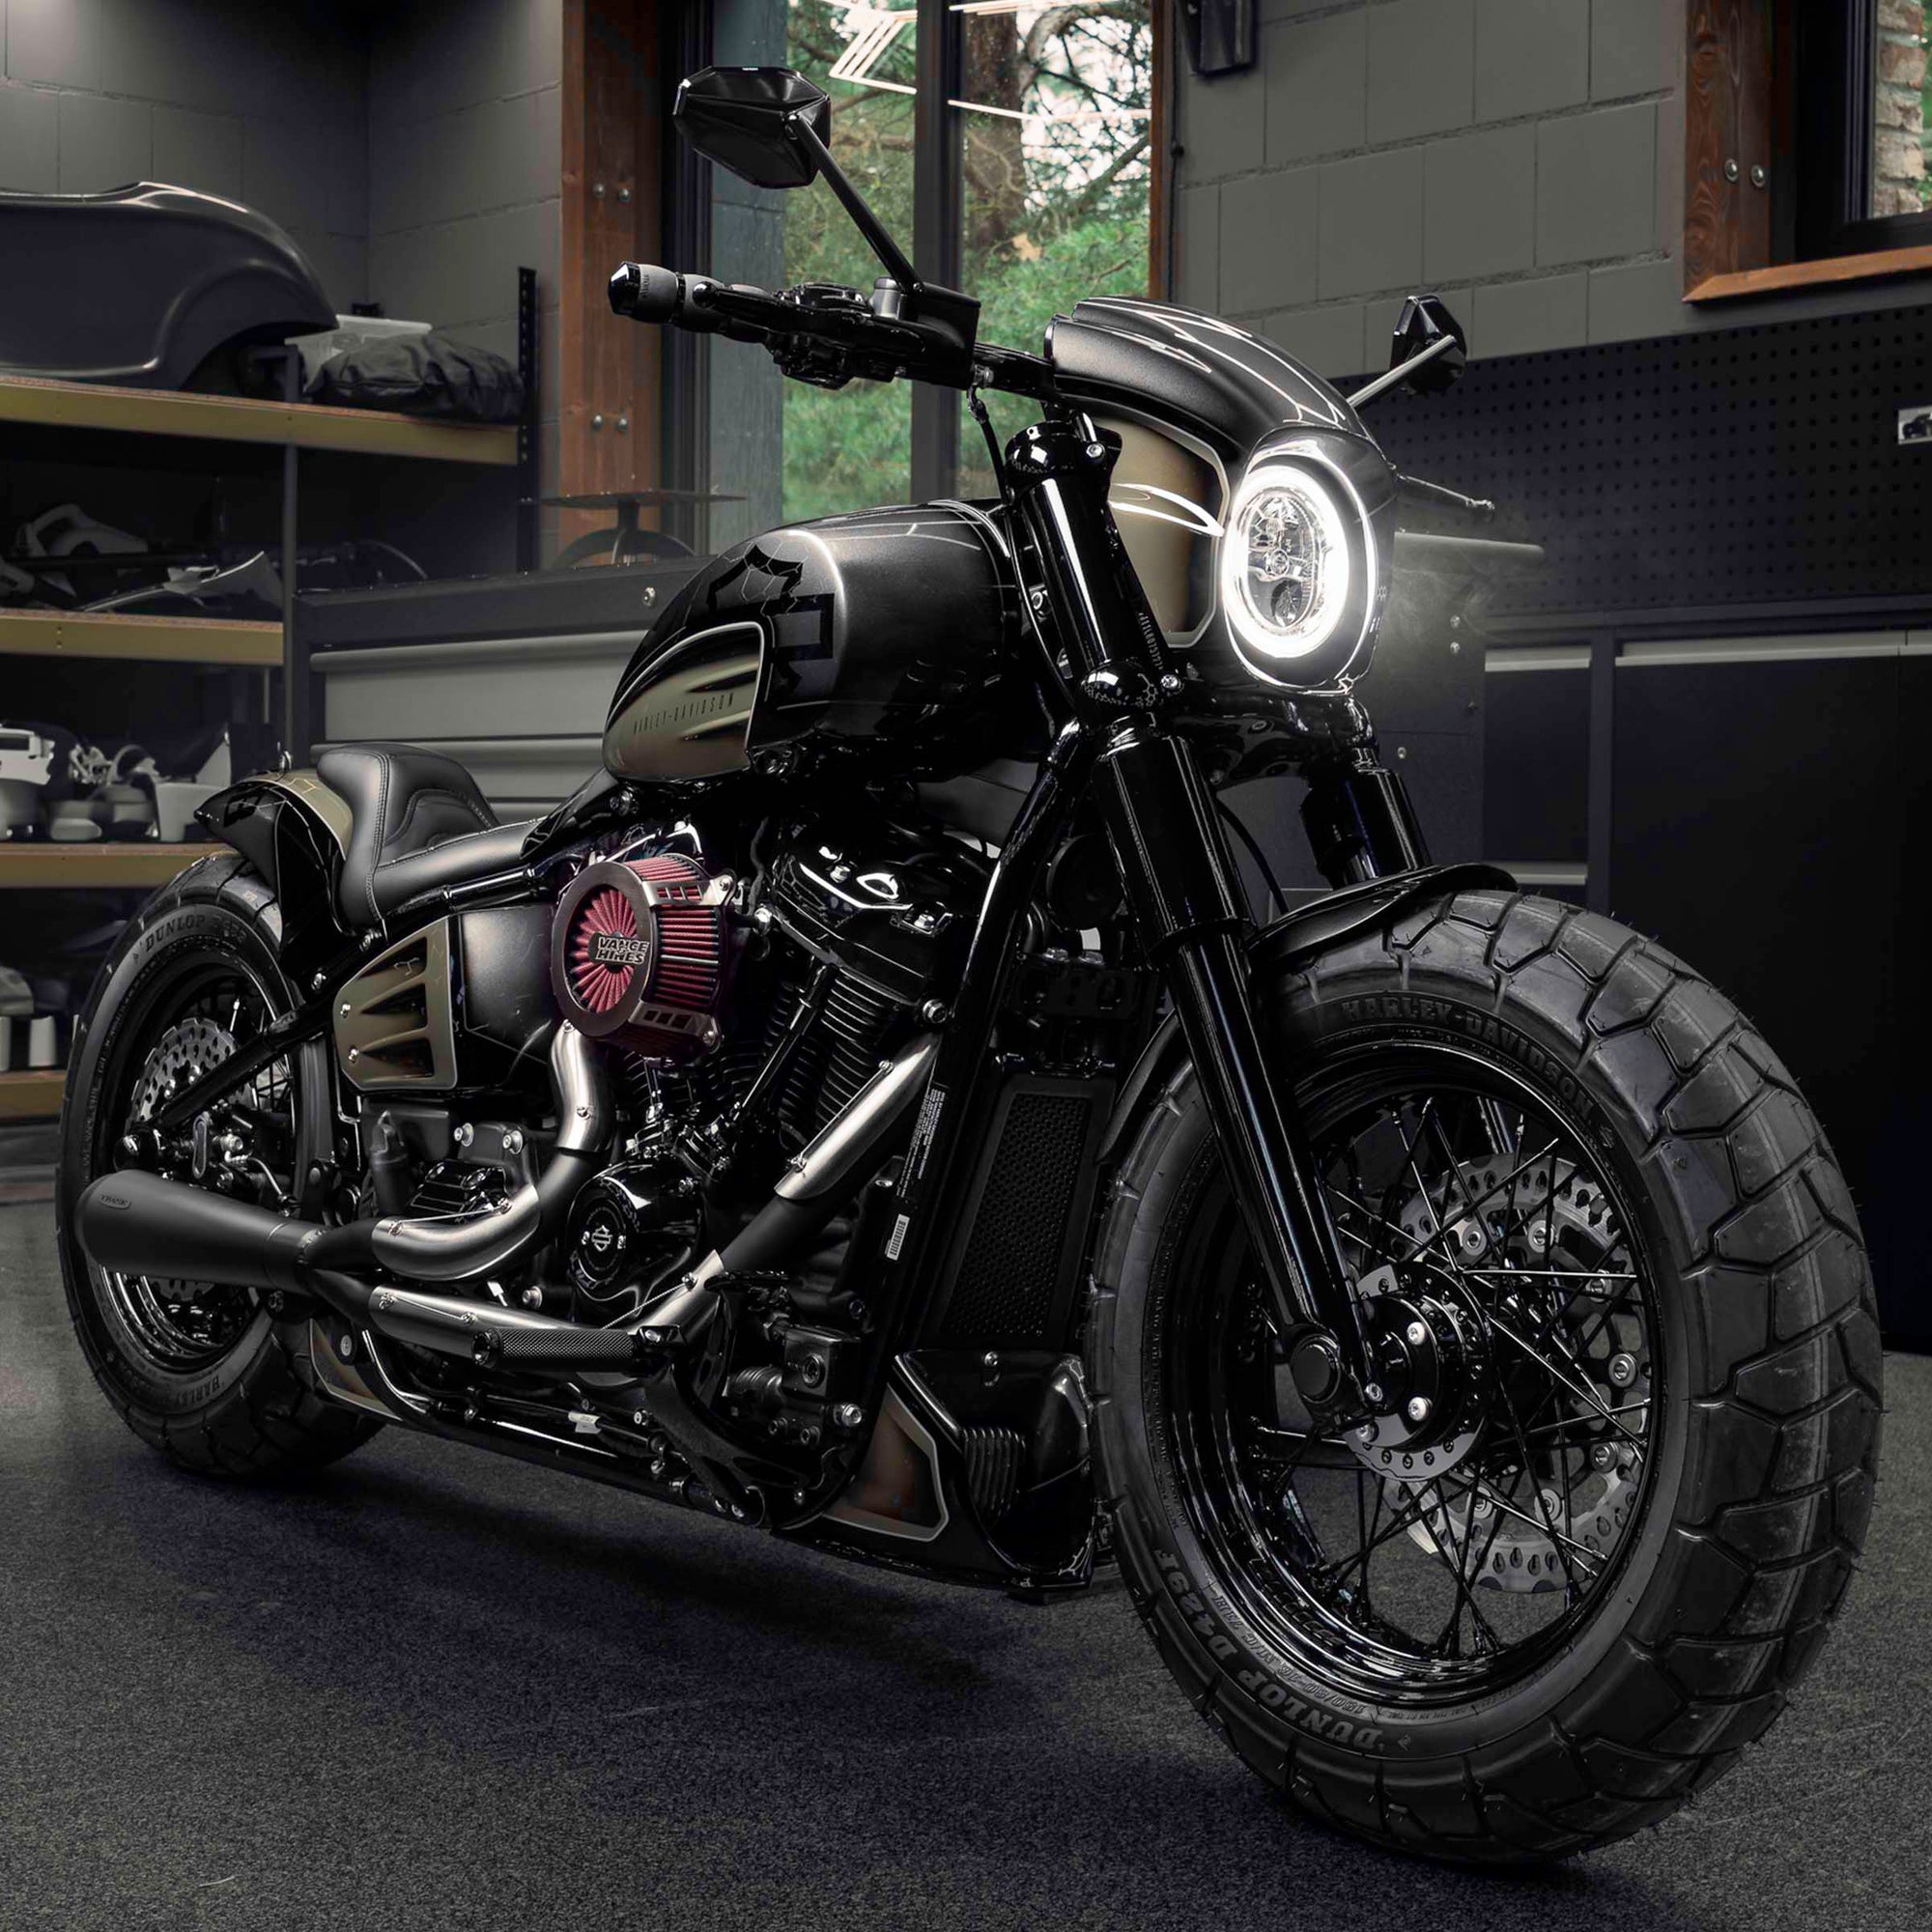 Modified Harley Davidson Street Bob motorcycle with Killer Custom parts from the front with some garage equipment and a window in the background